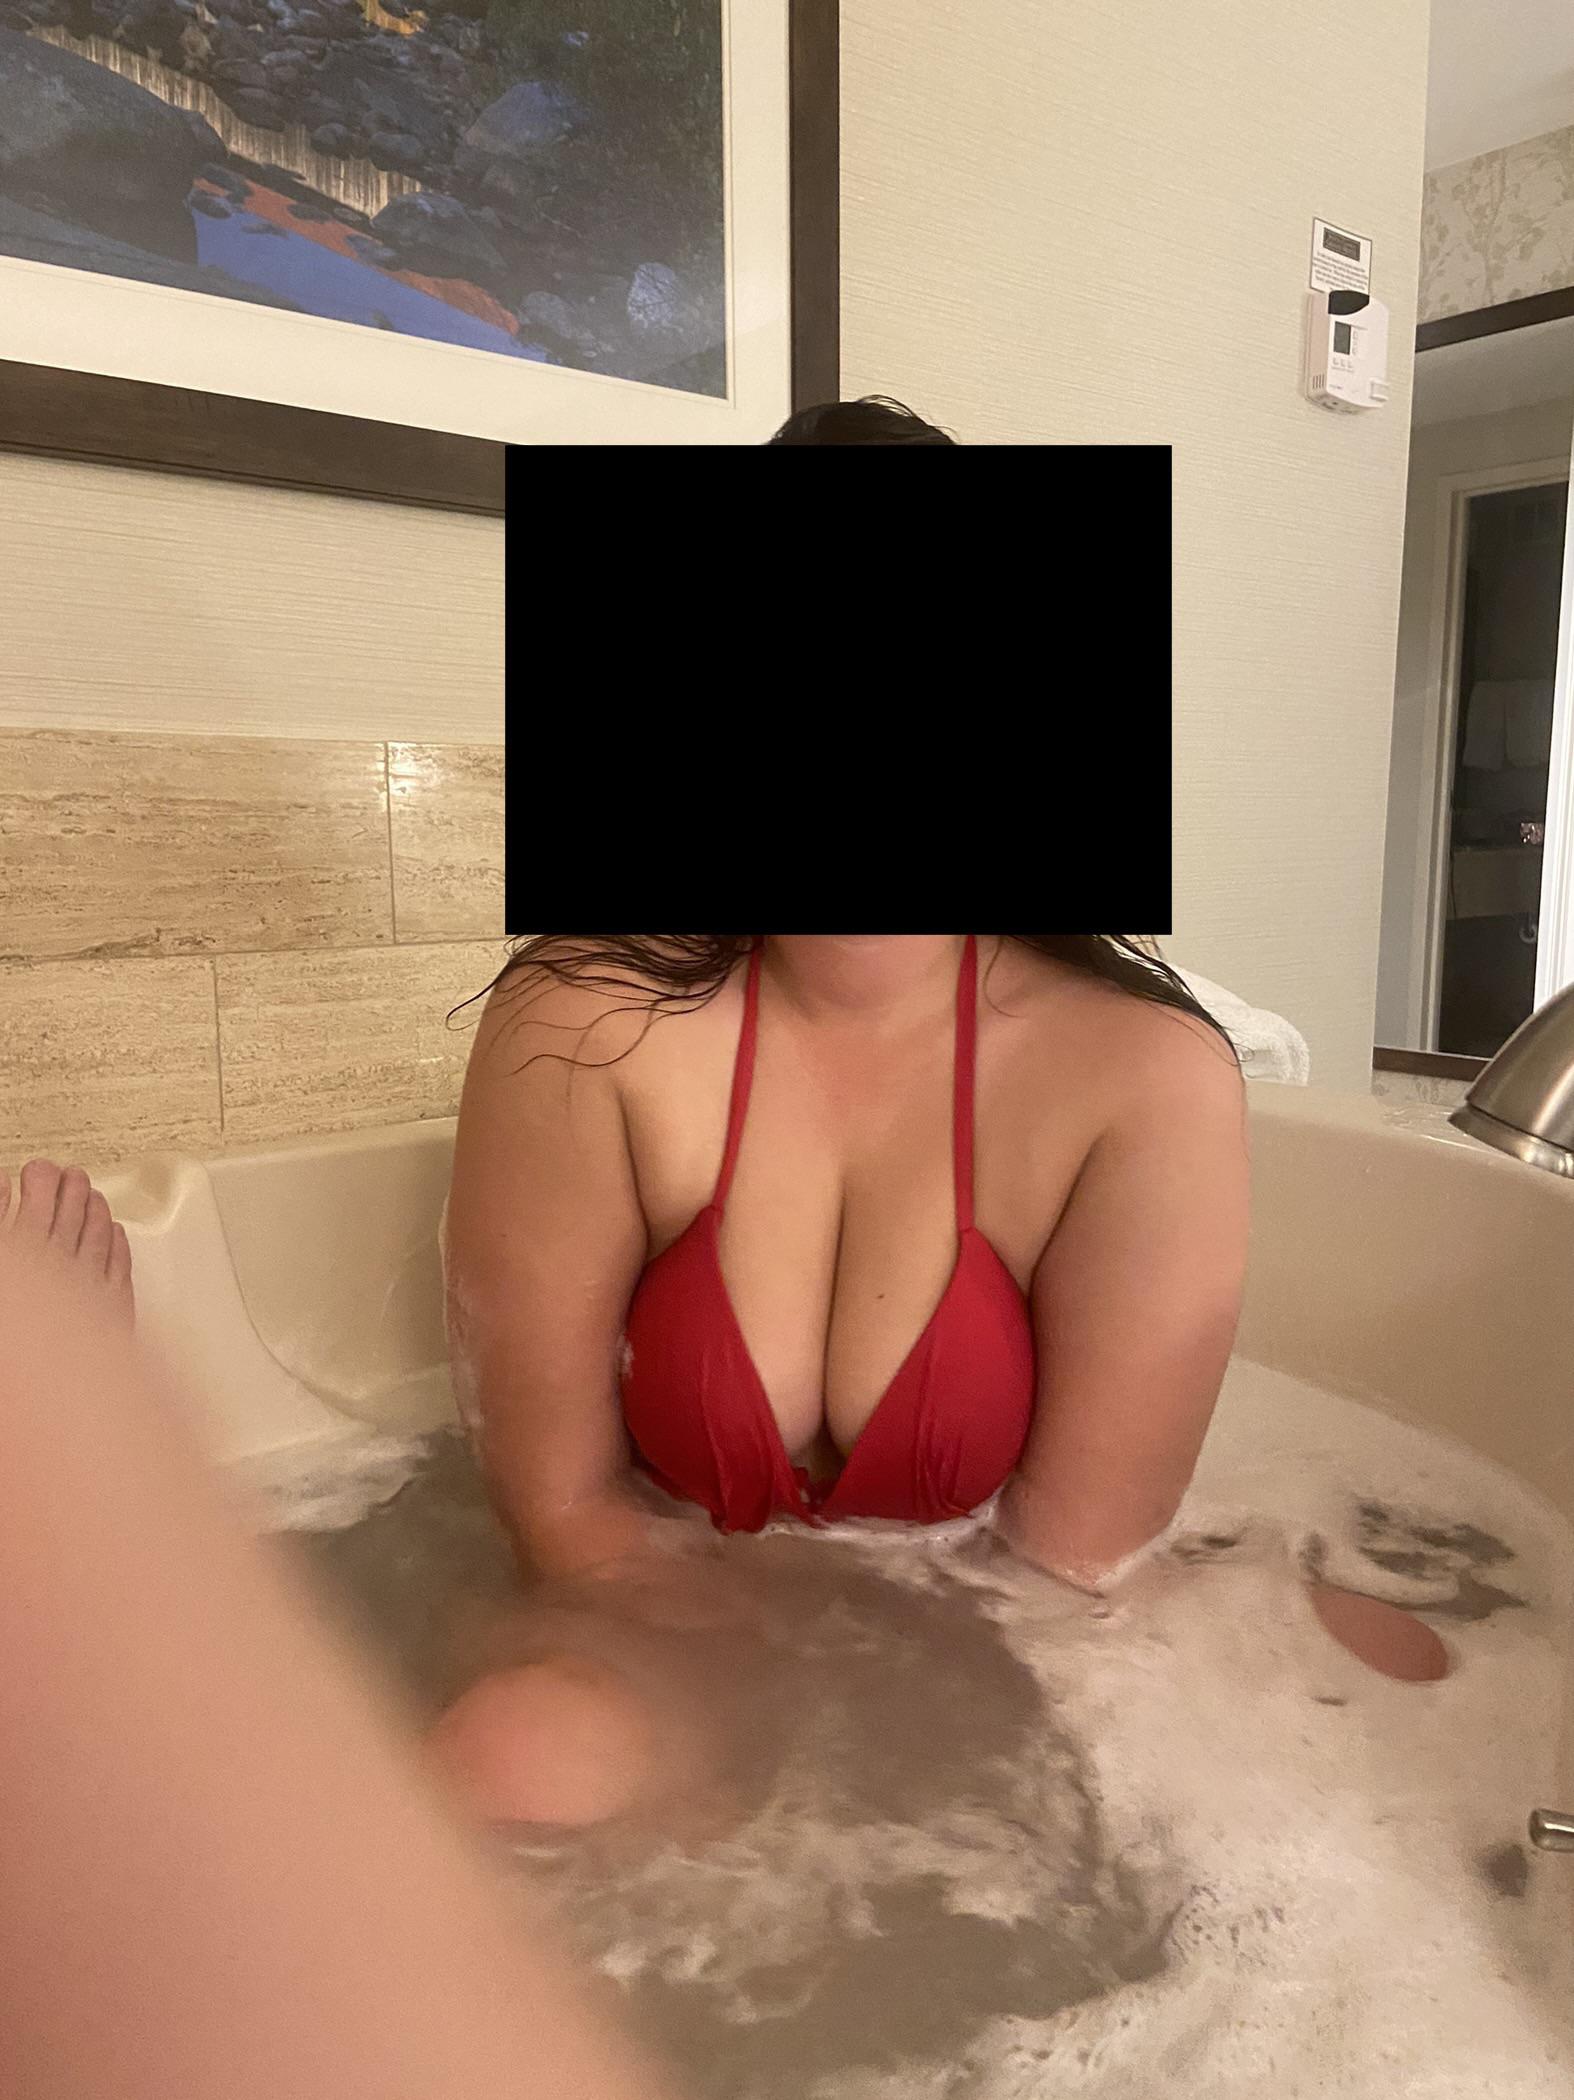 Suck on my wife's tits? Let us know.